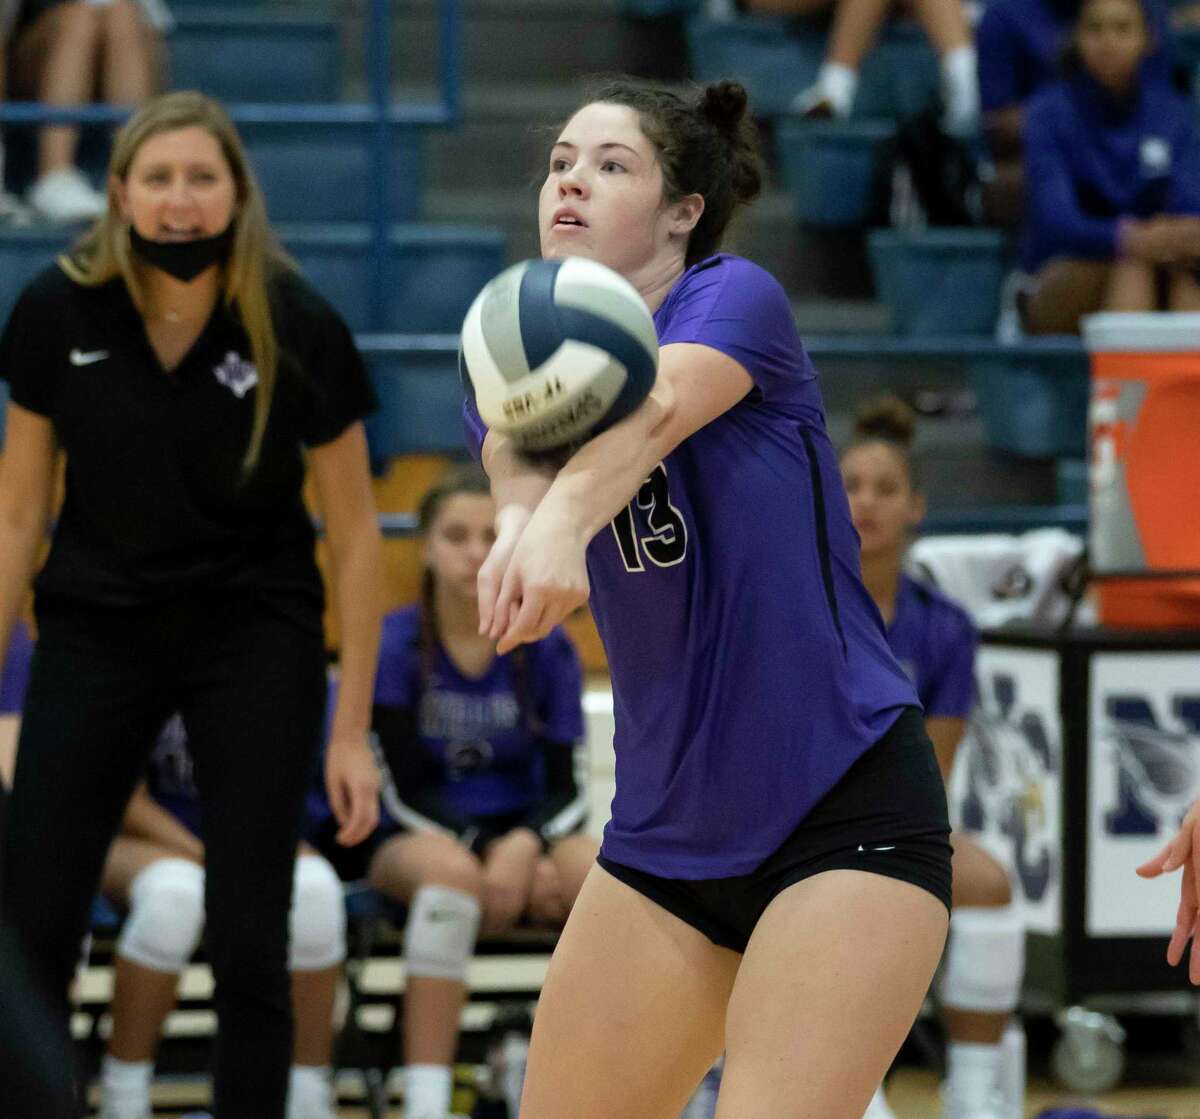 Willis junior Georgia Everett (13) returns a serve during the first set of a non-district volleyball match against New Caney High School, Tuesday, Sept. 15, 2020.